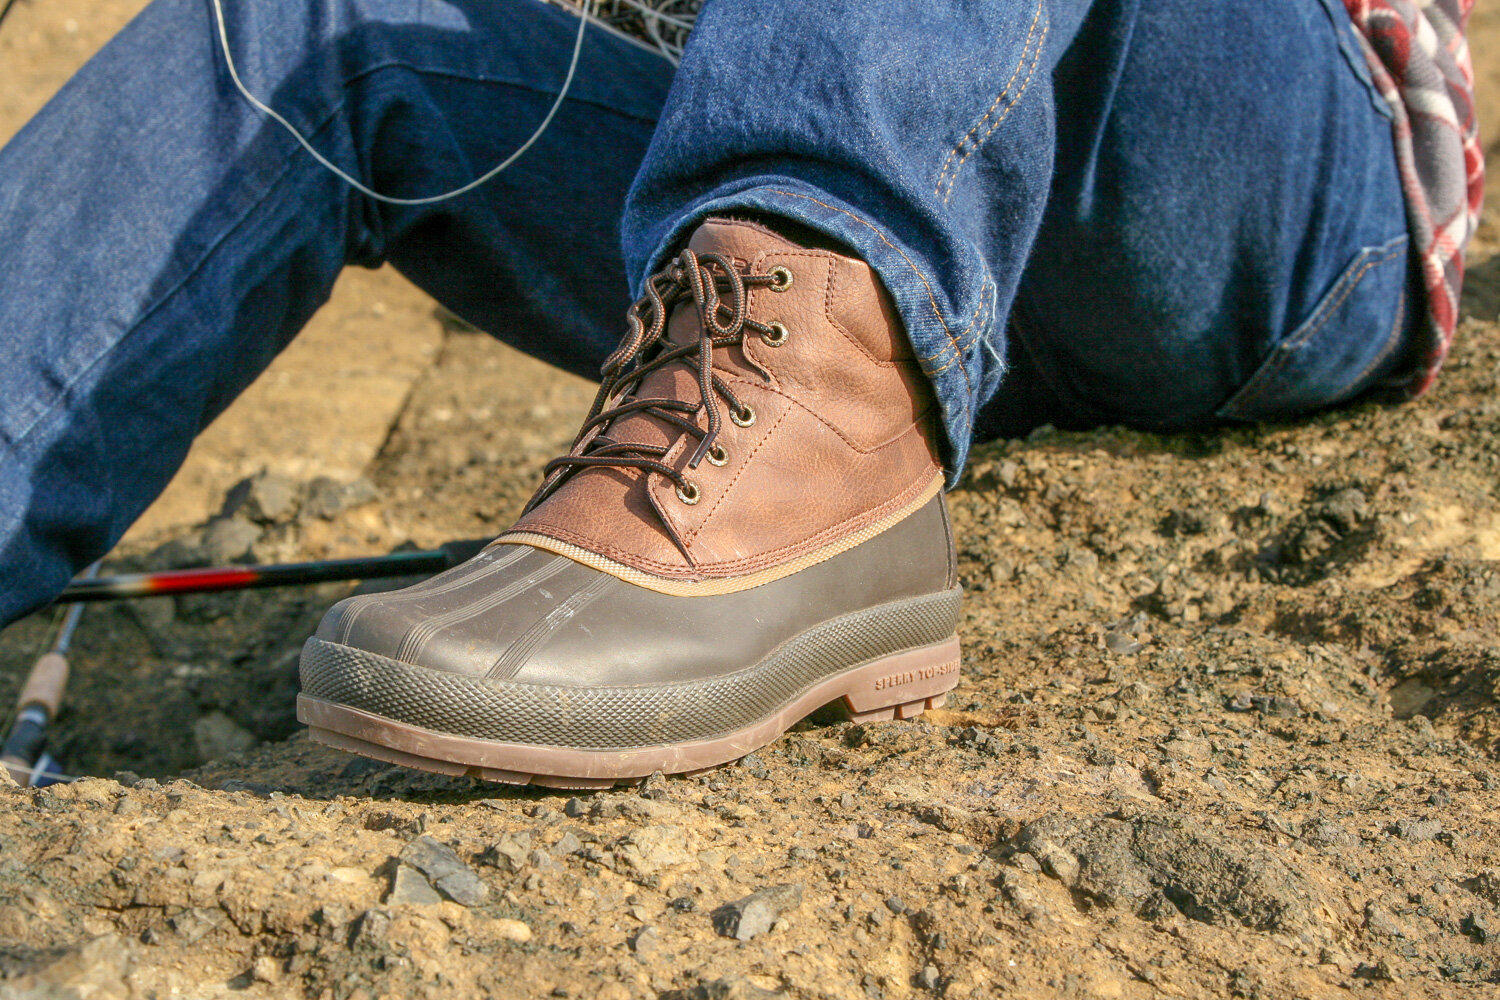 The durable Sperry Cold Bay Chukka boots are great for outdoor work, and they’re also stylish for around town use.